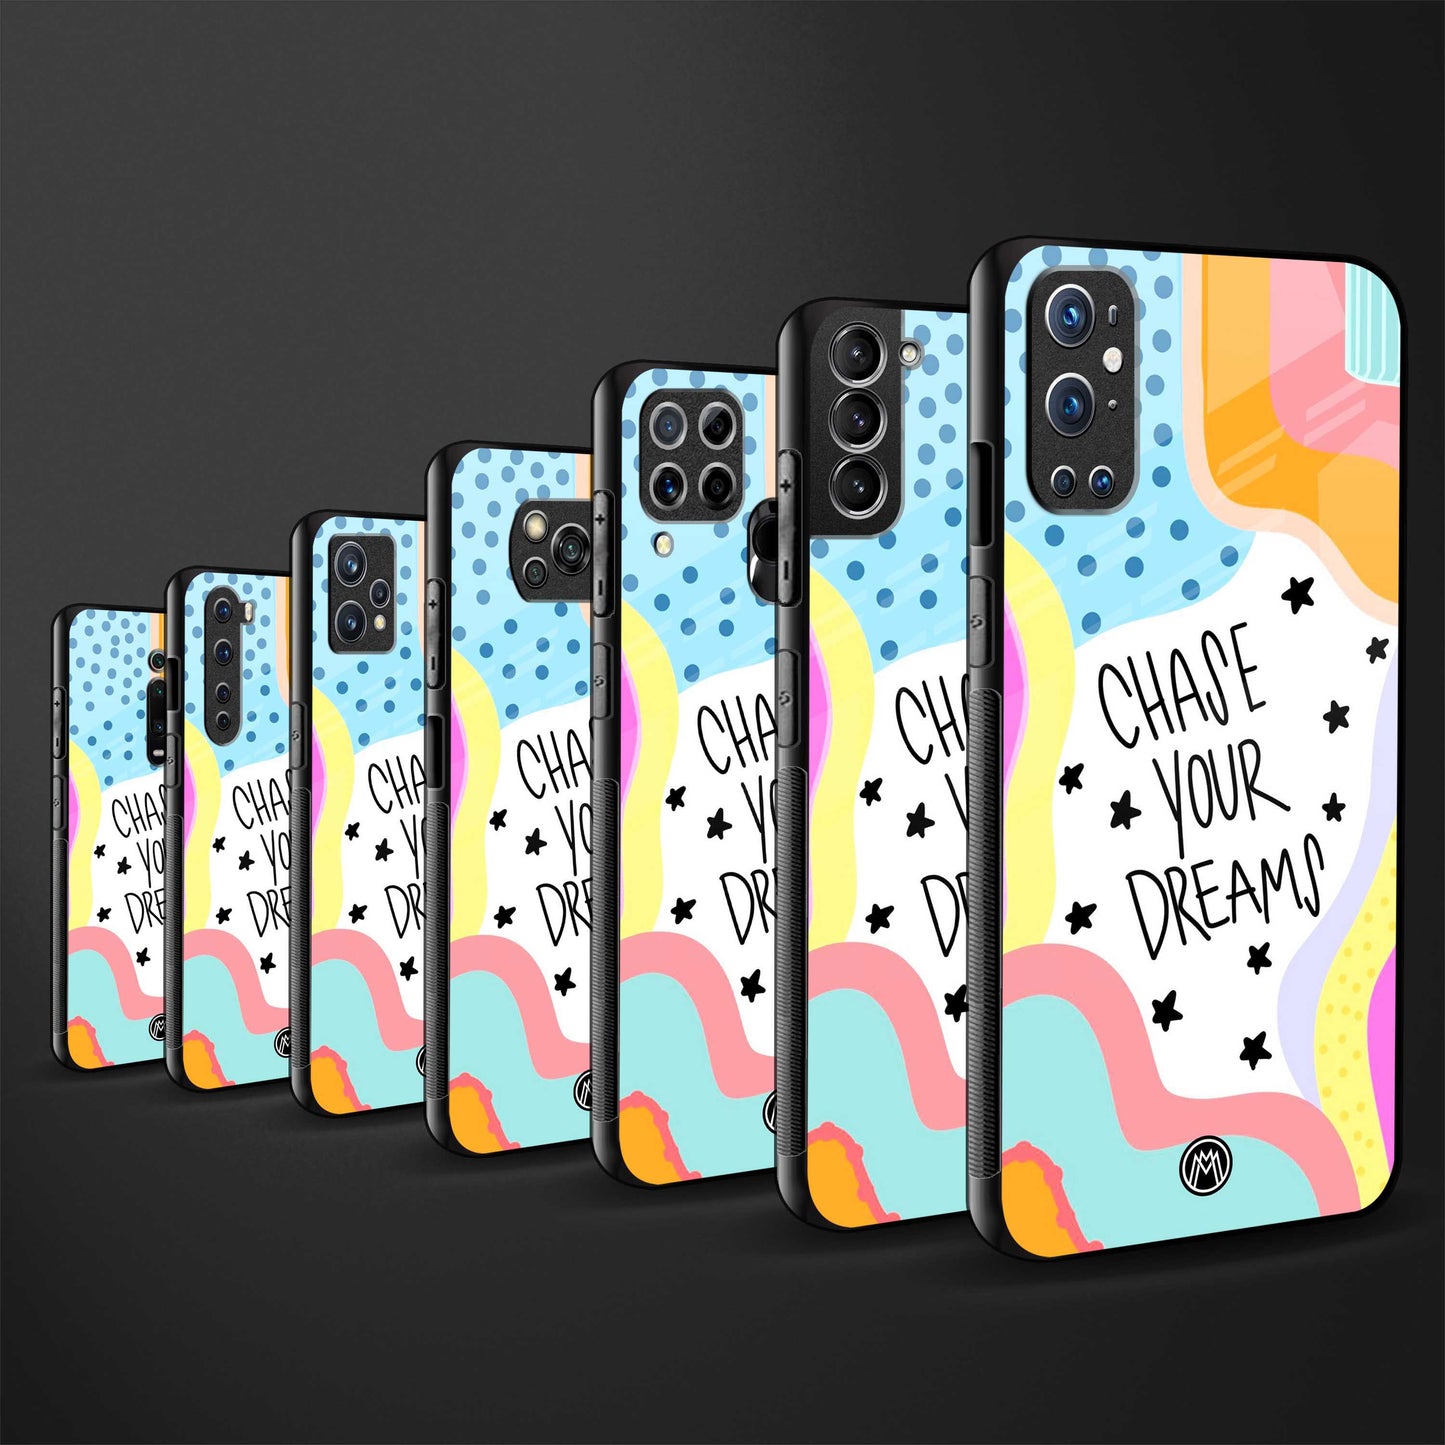 chase your dreams glass case for oneplus 6 image-3